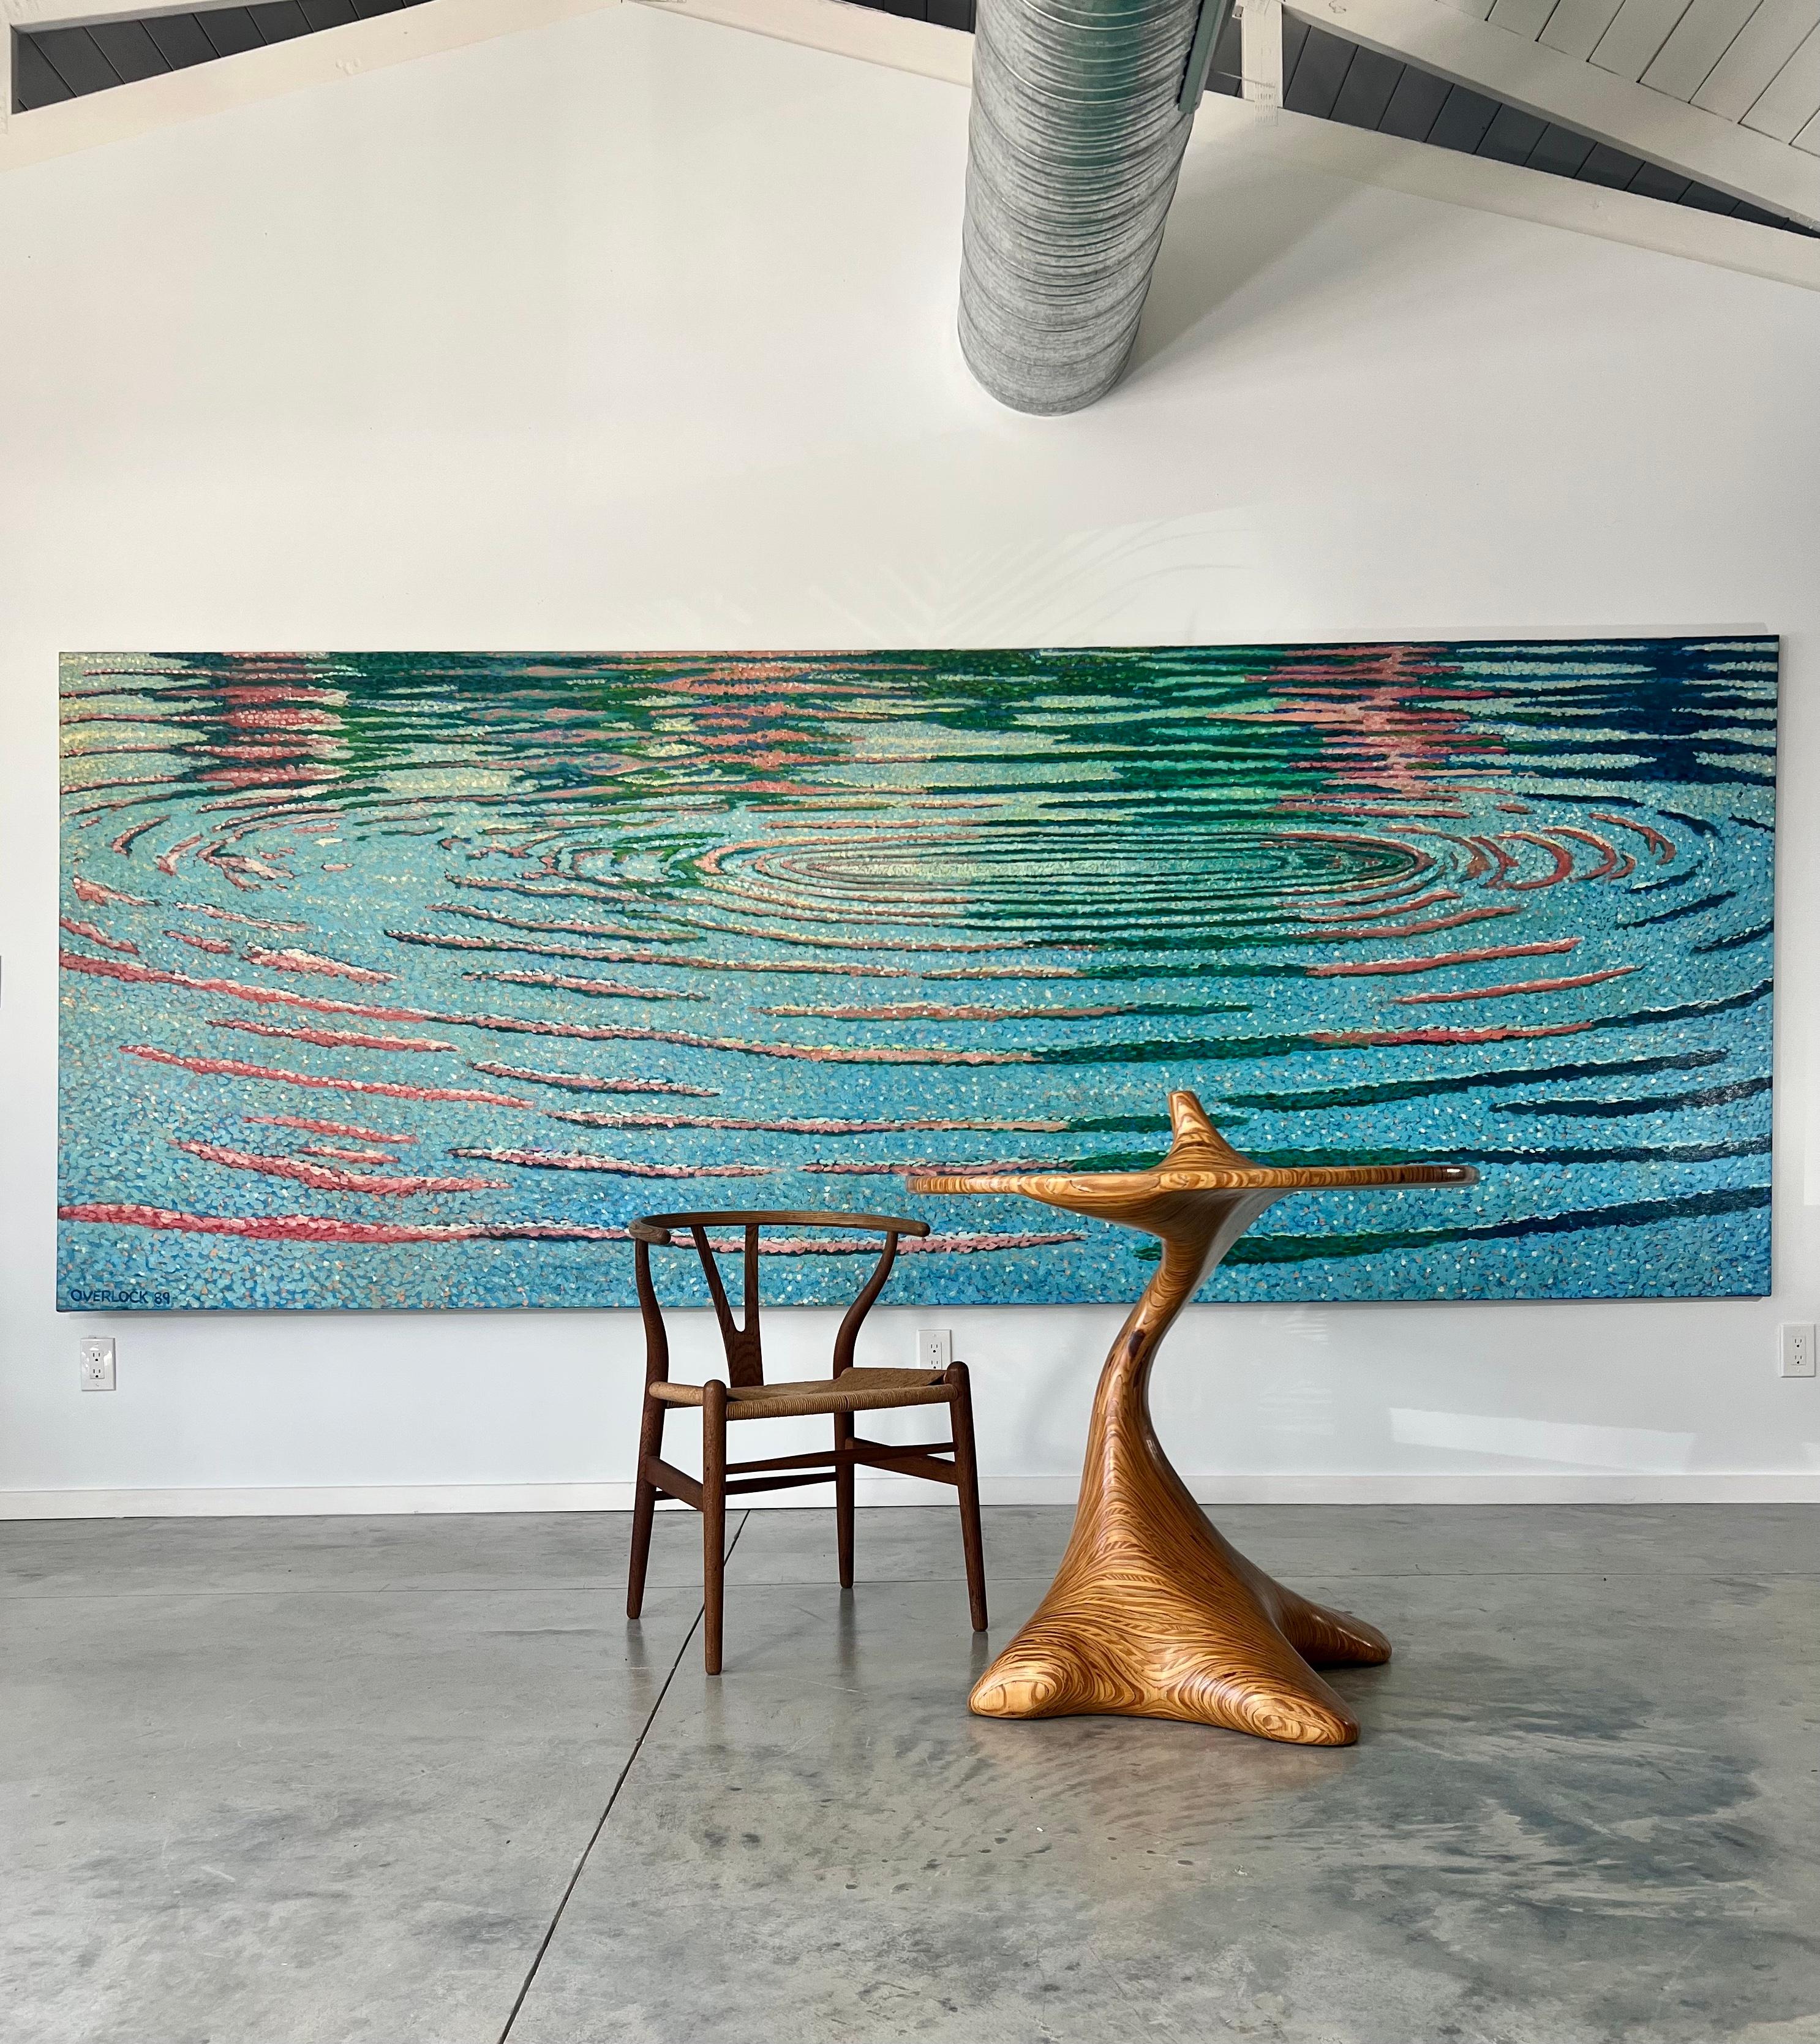 A monumentally sized original pointilism oil on canvas by recognized artist Chester Overlock 1989.  Titled Deep Waters Run Still, Series IV “Saiontz of Being” This painting measures 13’ wide by 5’ tall. Chester Overlock was an artist producing